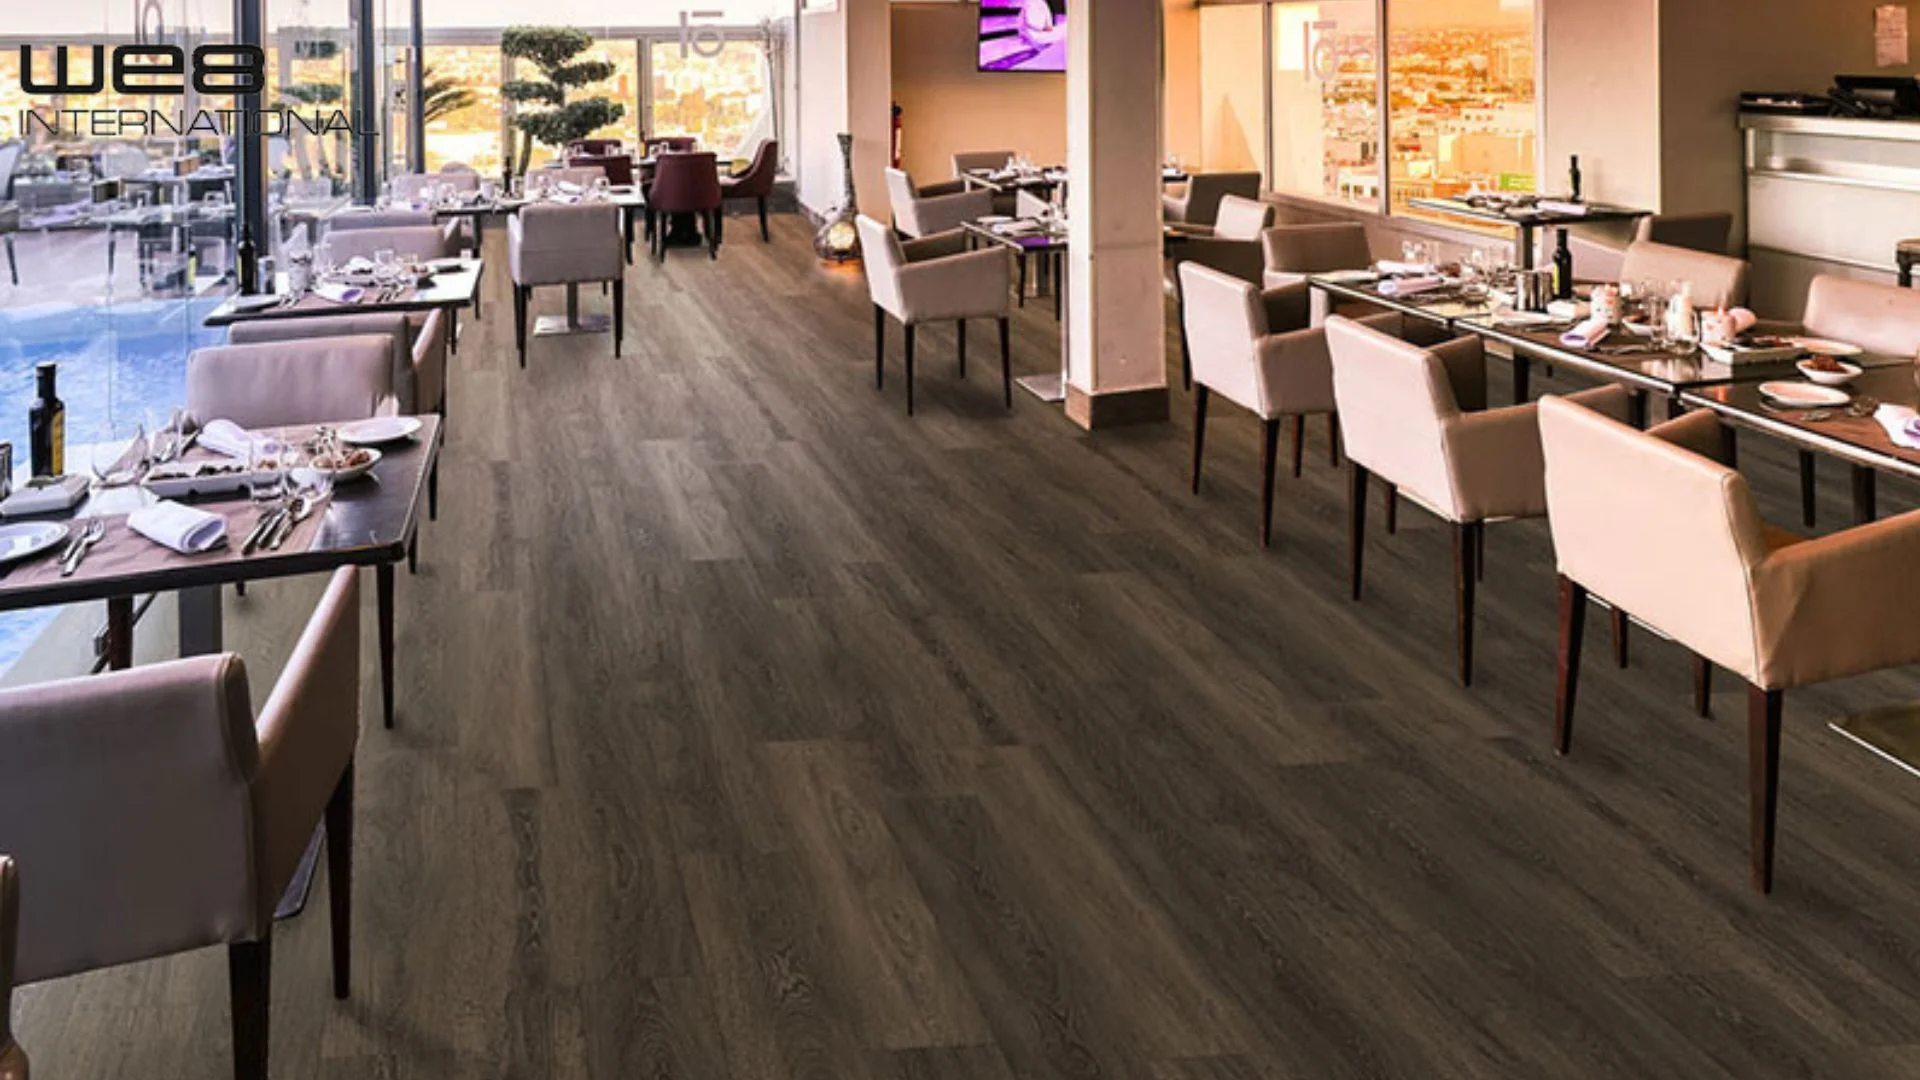 Installing SPC Flooring in High Traffic Commercial Spaces